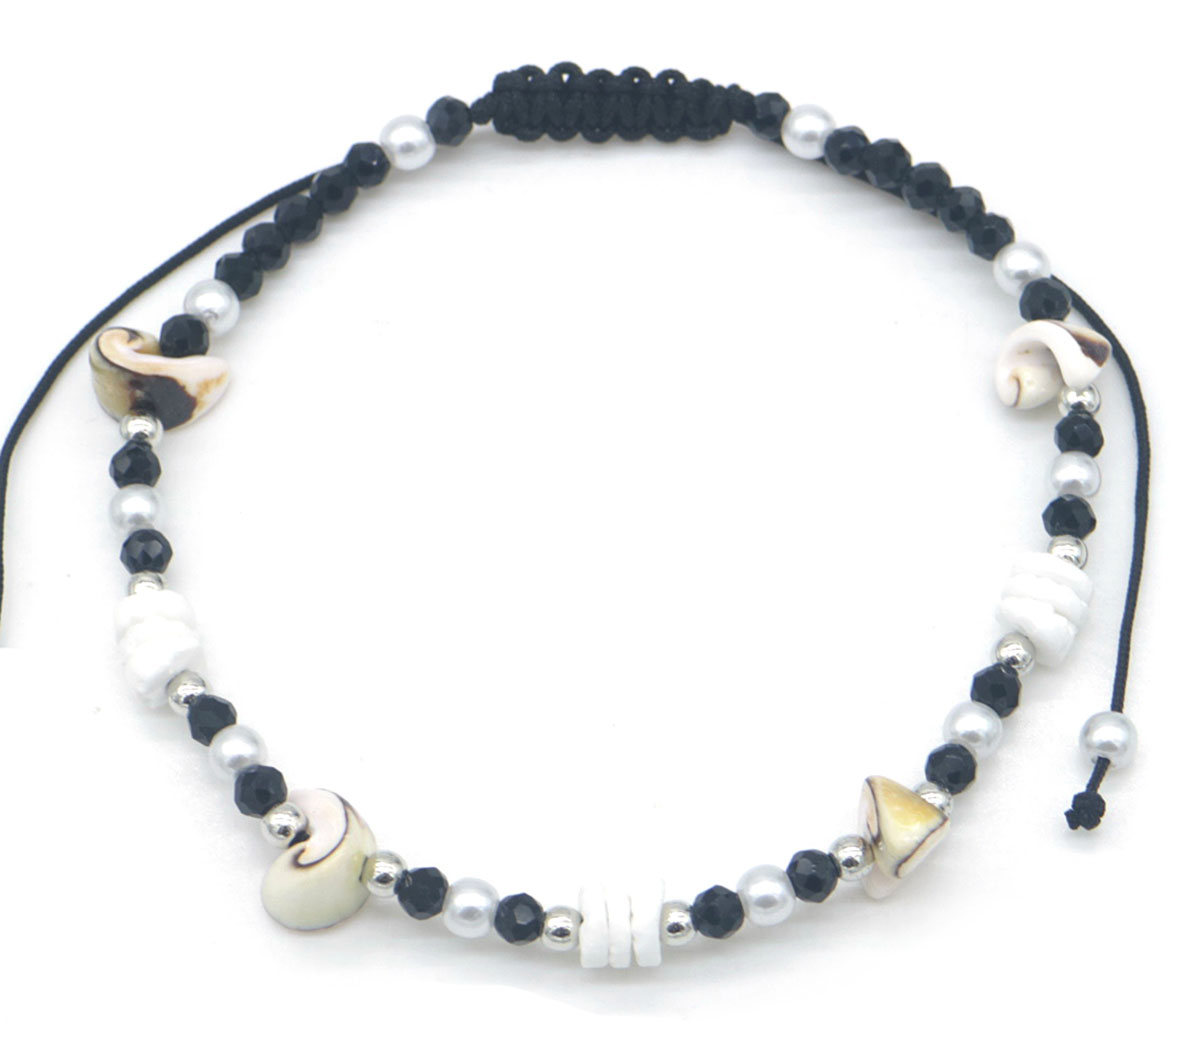 A-A23.1 ANK830-005-3 Anklet beads Black 